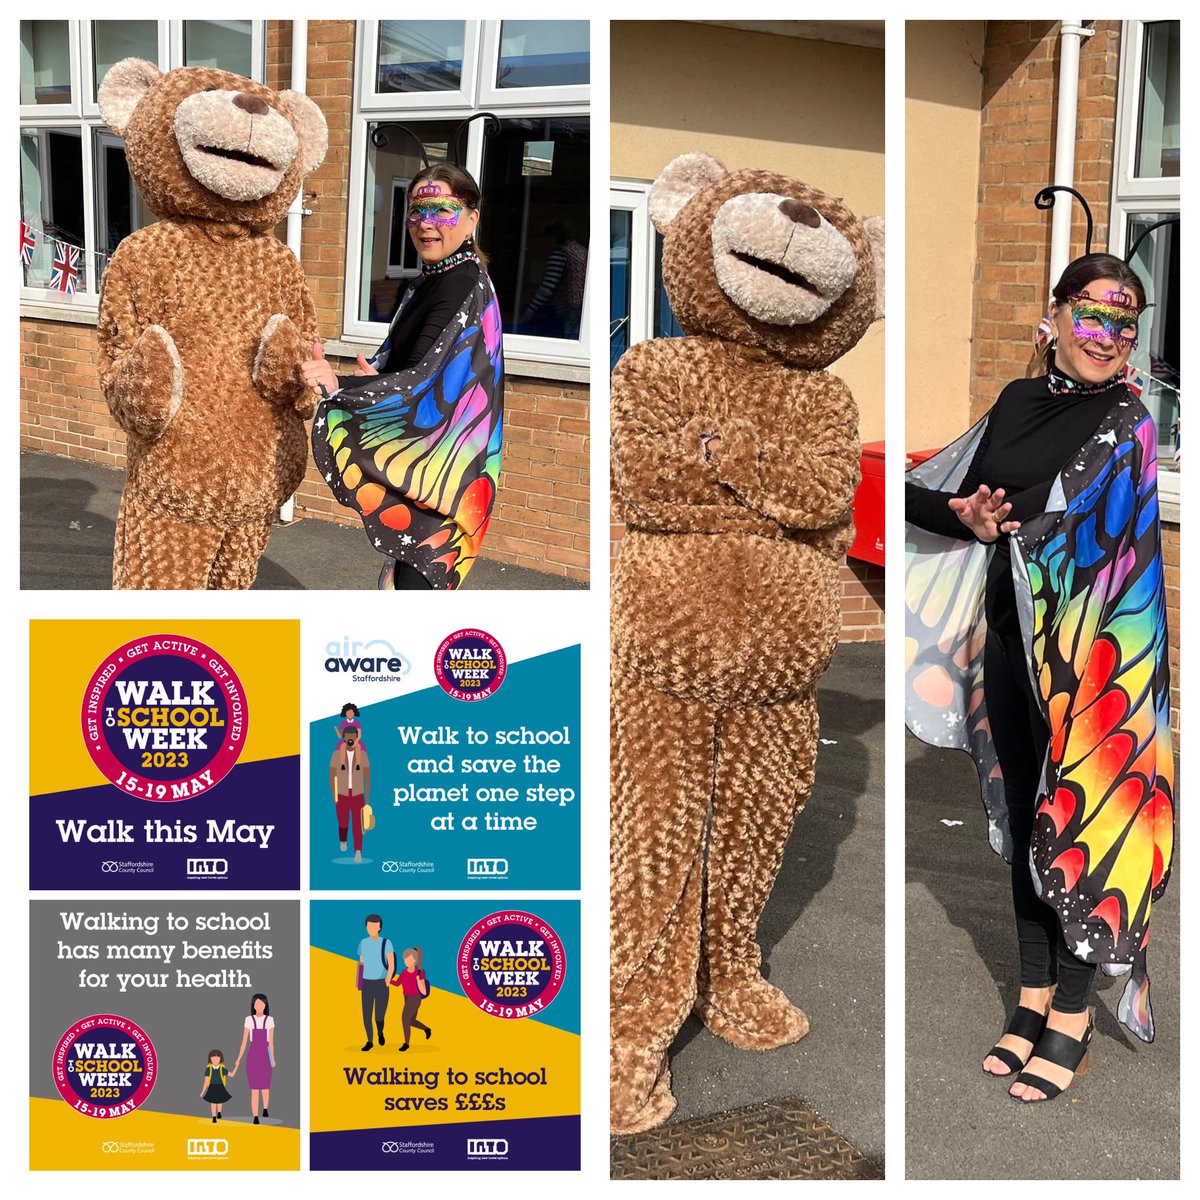 Another great turn out today for ‘Walk to School Week’; The Butterfly and The Bear led the convoy to school.  Thank you for your ongoing support - together, we are making a big difference and that makes us very proud of our school community.  @AirAwareStaffs #INTOWalkingStaffs